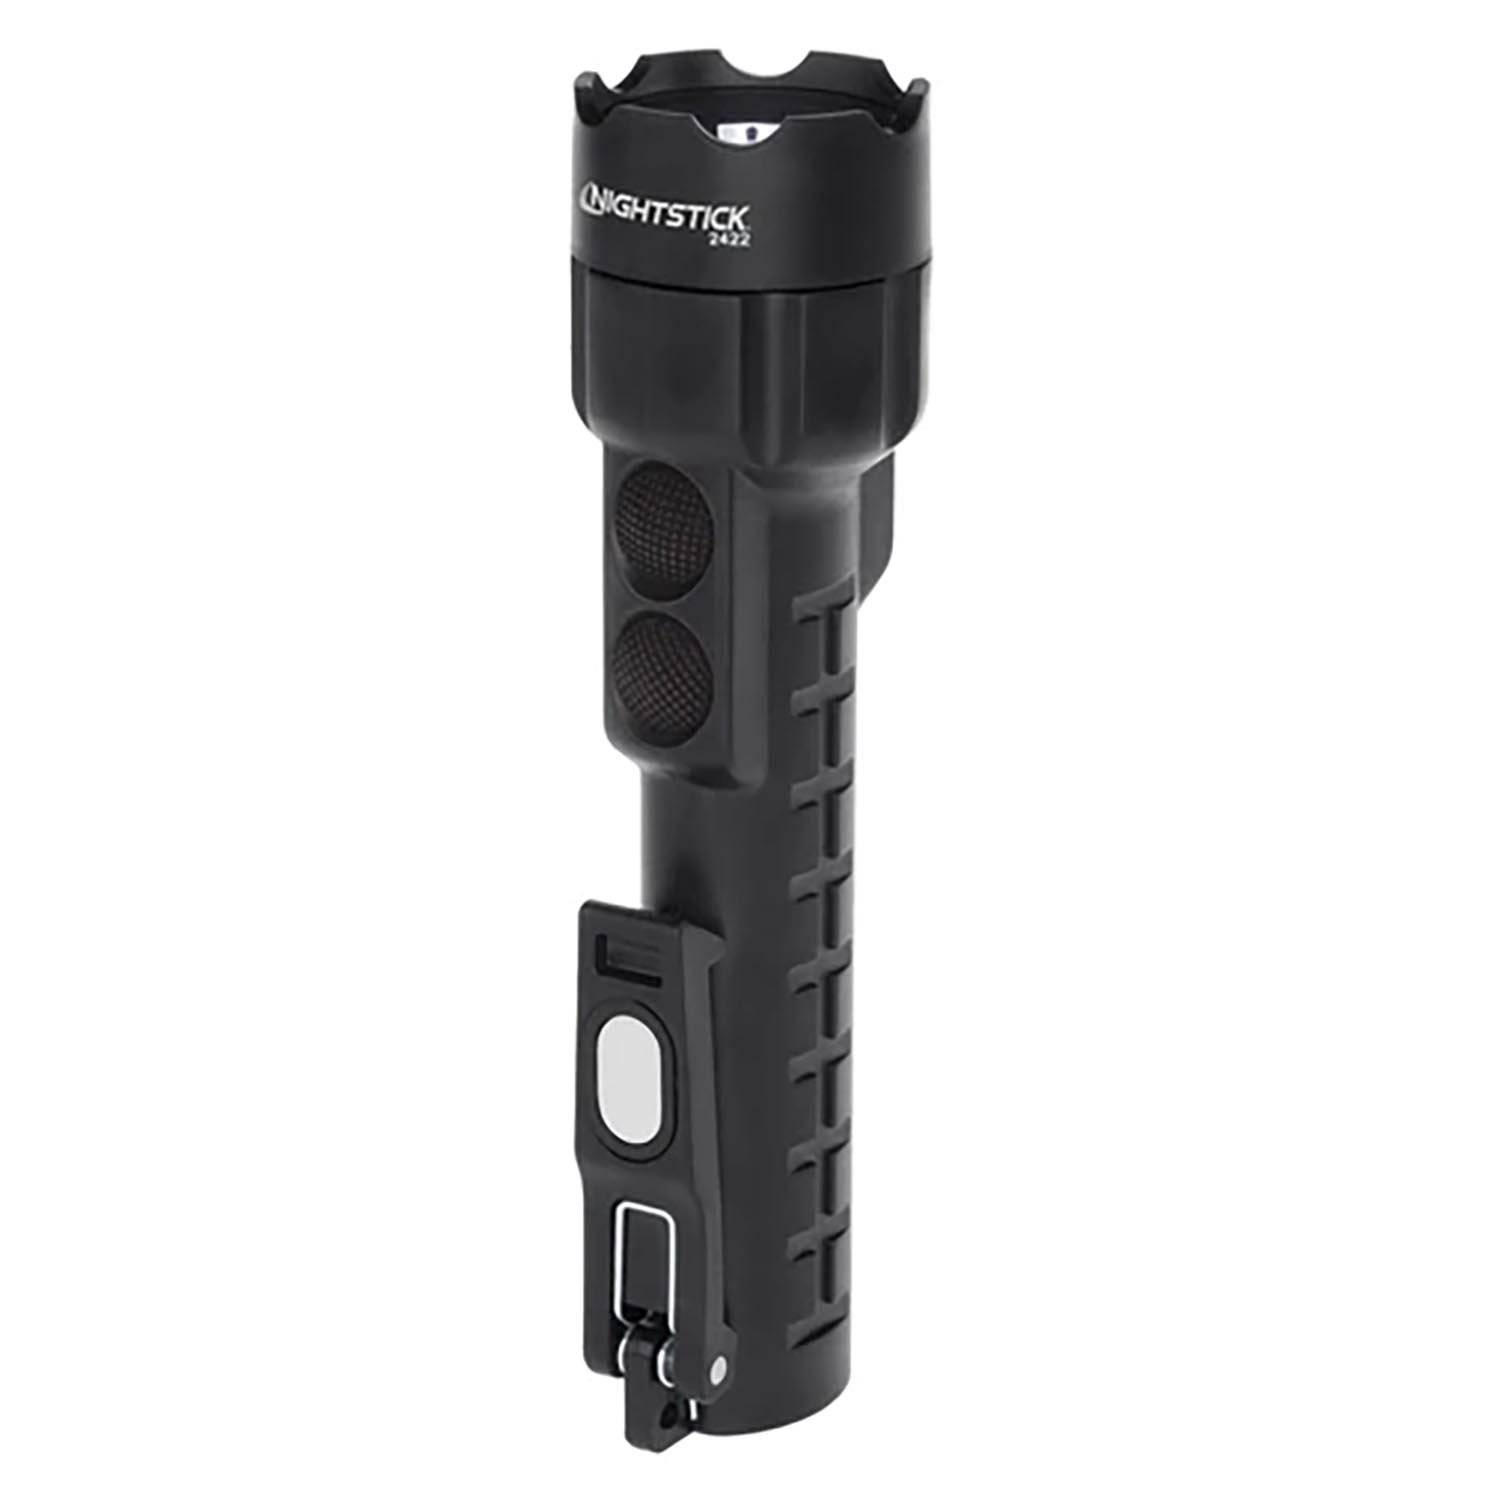 NIGHTSTICK DUAL-LIGHT FLASHLIGHT WITH DUAL MAGNETS